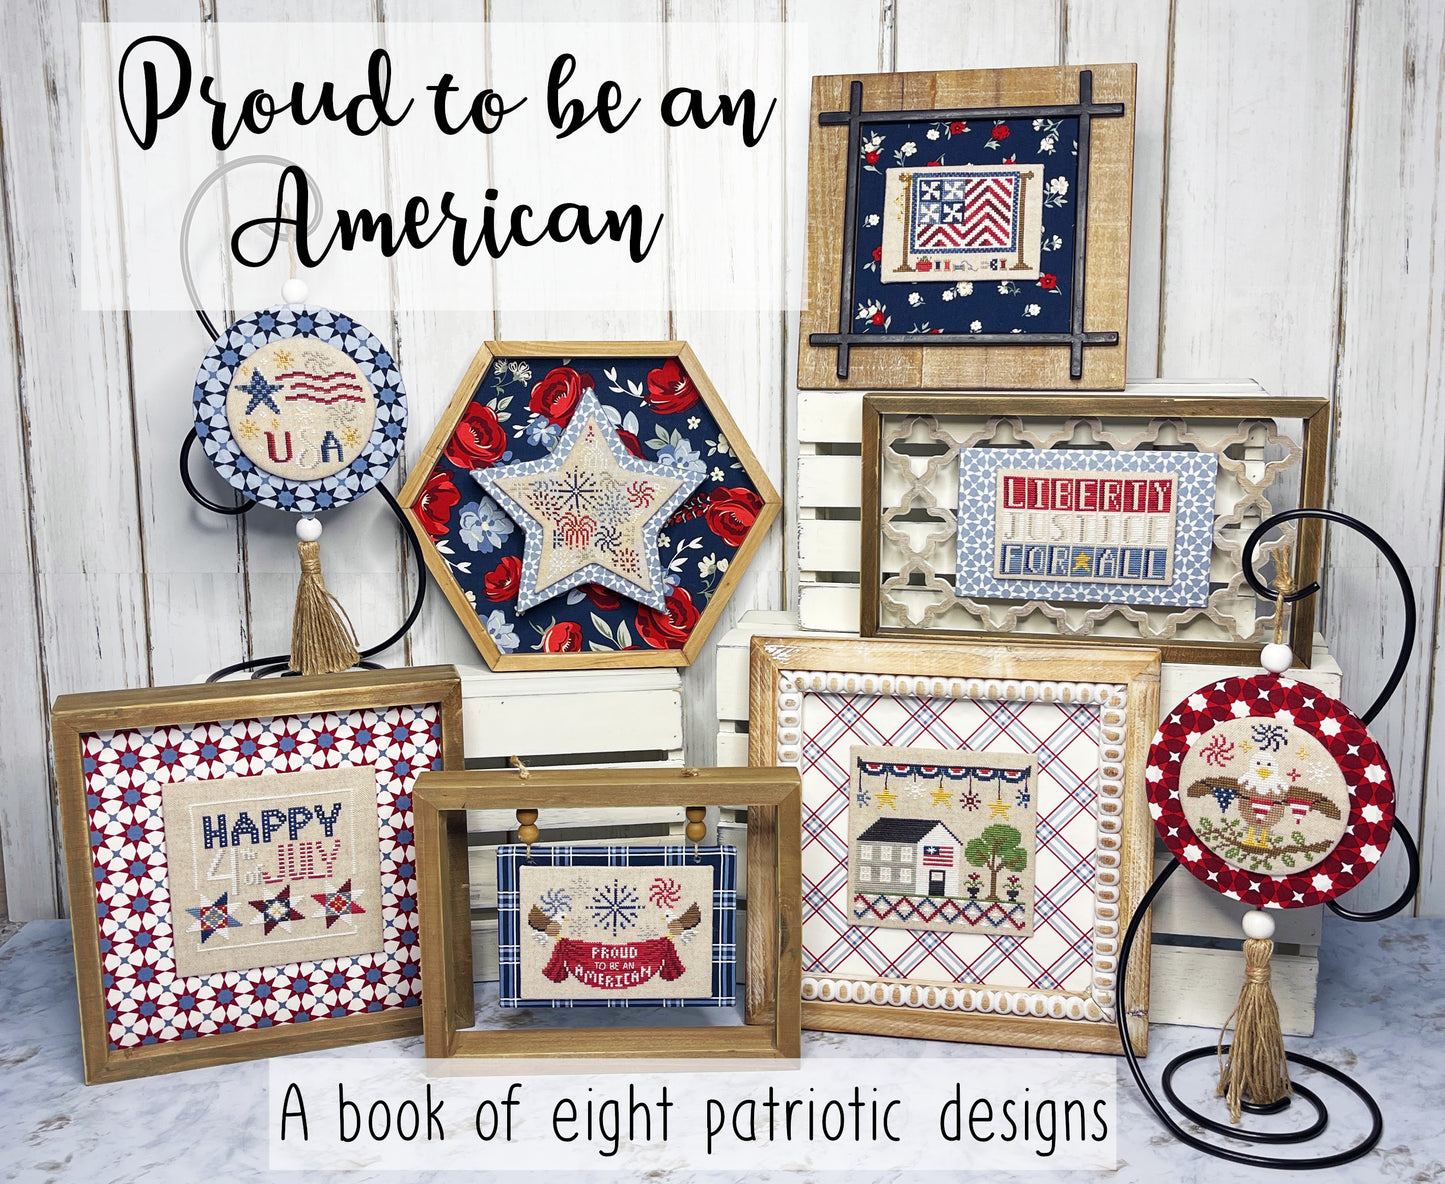 Proud to be and American - Little Stitch Girl